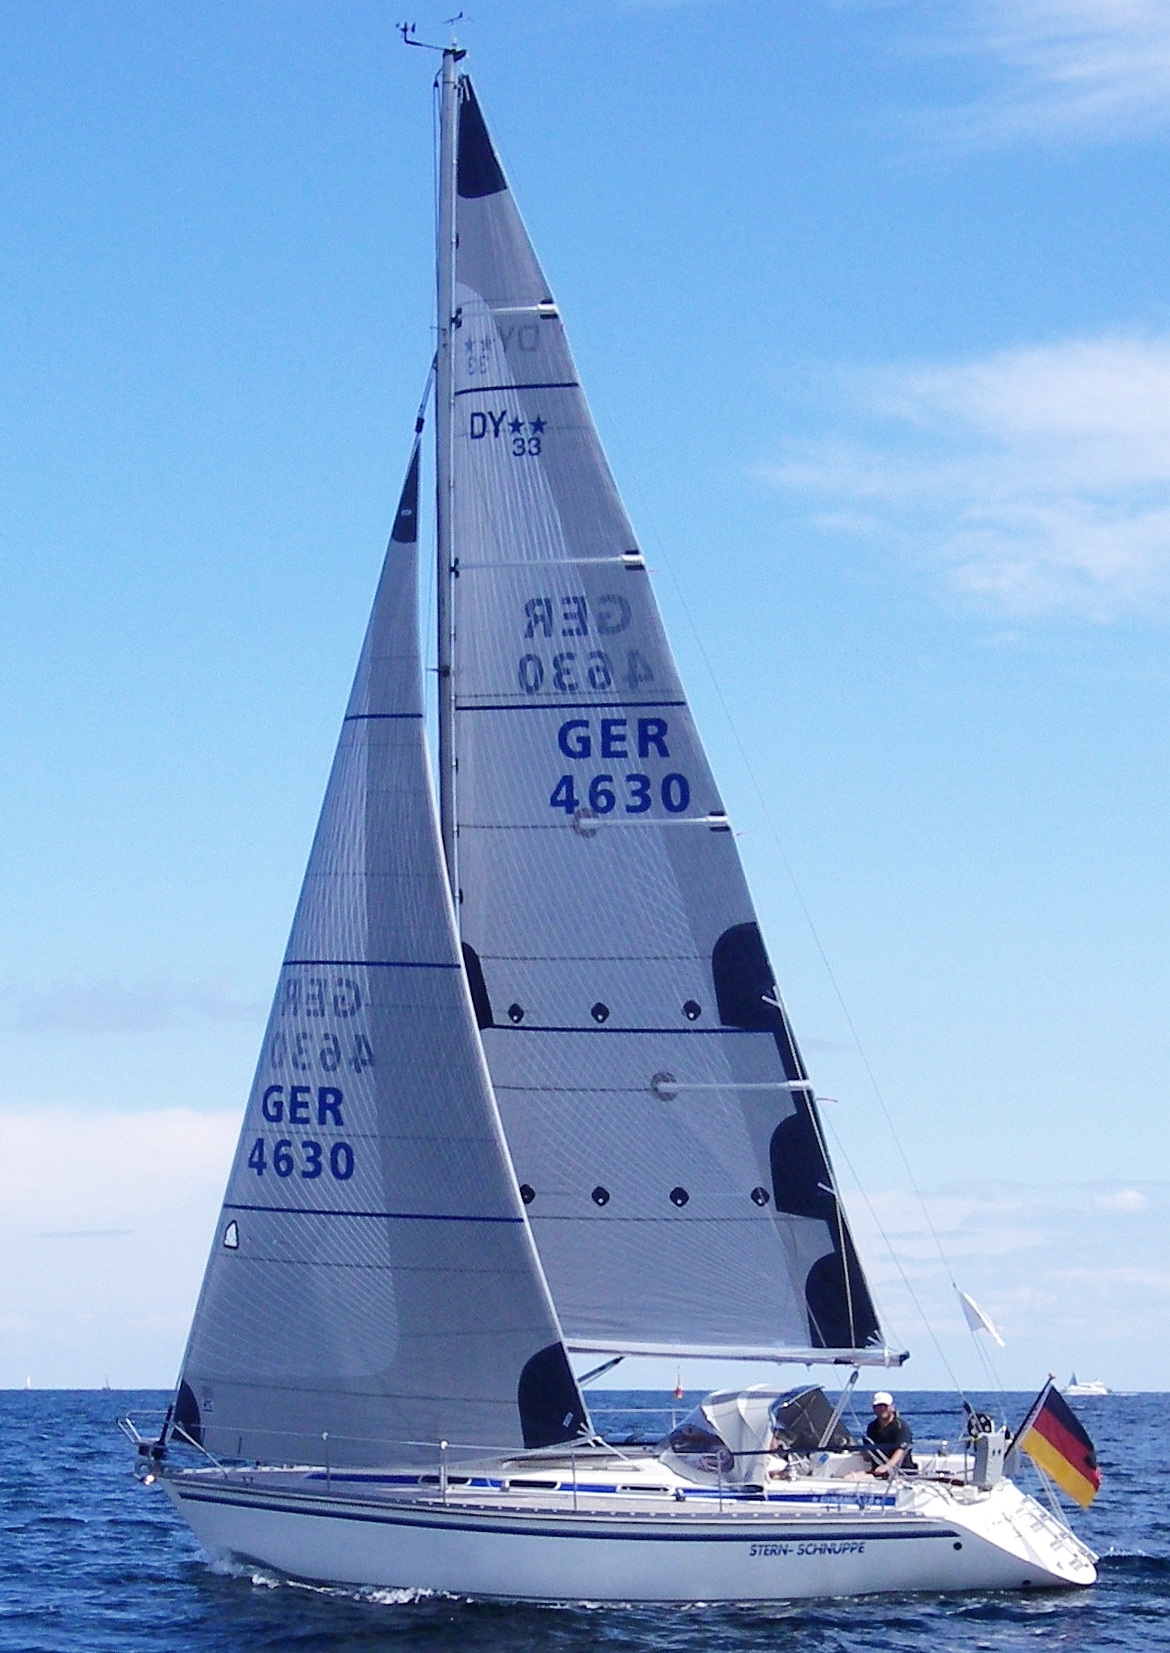 The genoa shown above has taffeta on the part of the sail overlapping the mast to protect the load path fibers and the sail's mylar layer.